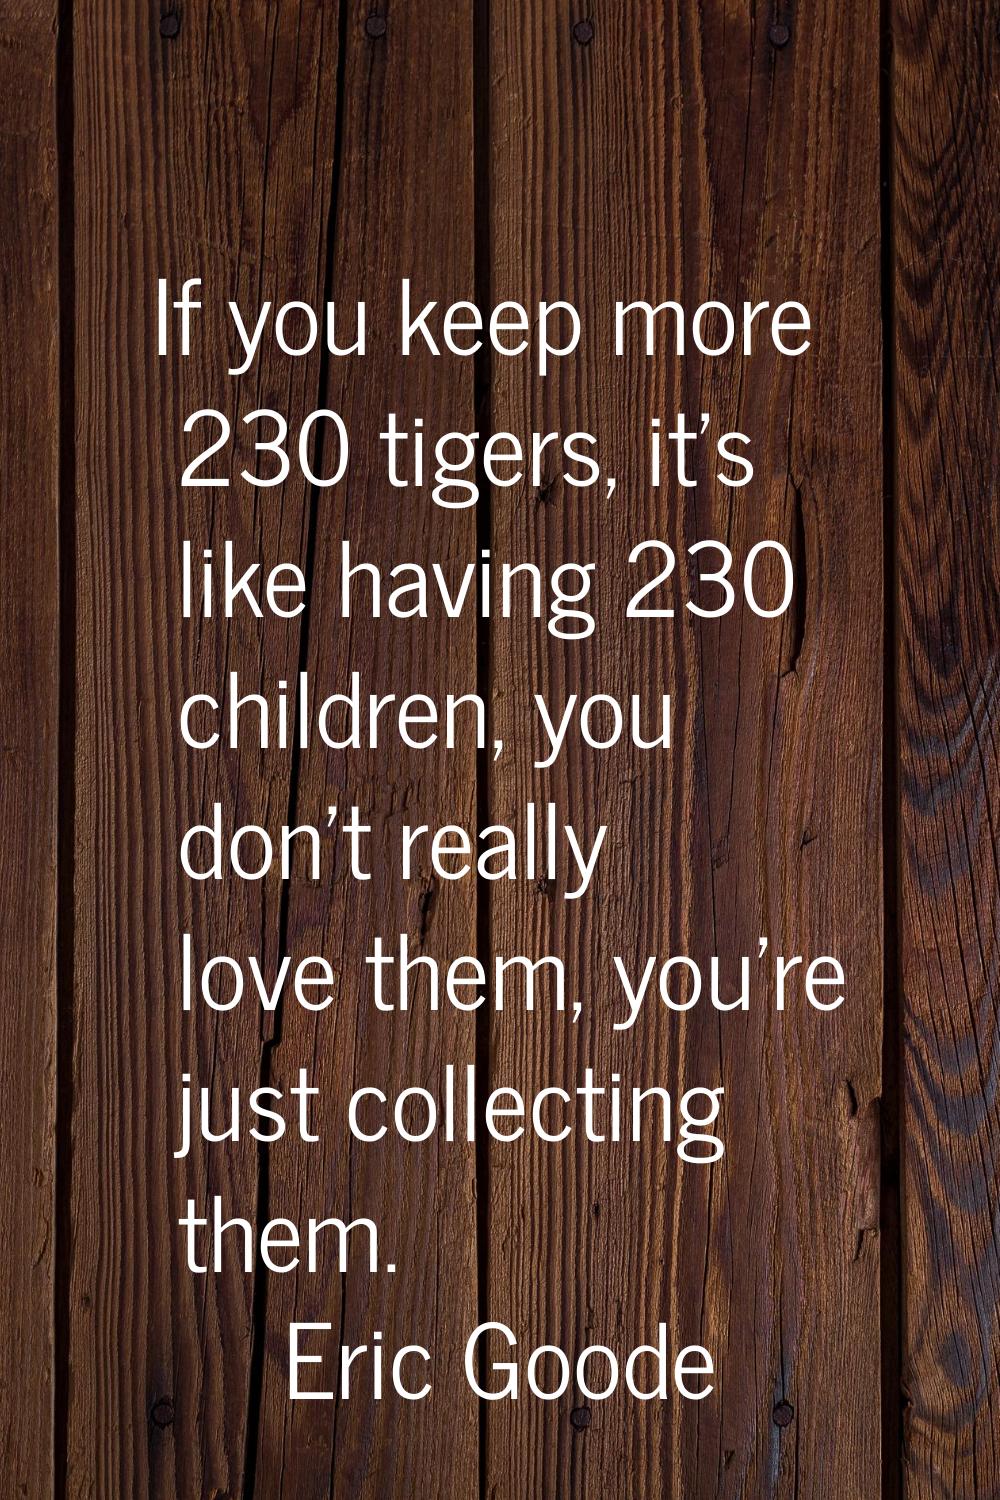 If you keep more 230 tigers, it's like having 230 children, you don't really love them, you're just